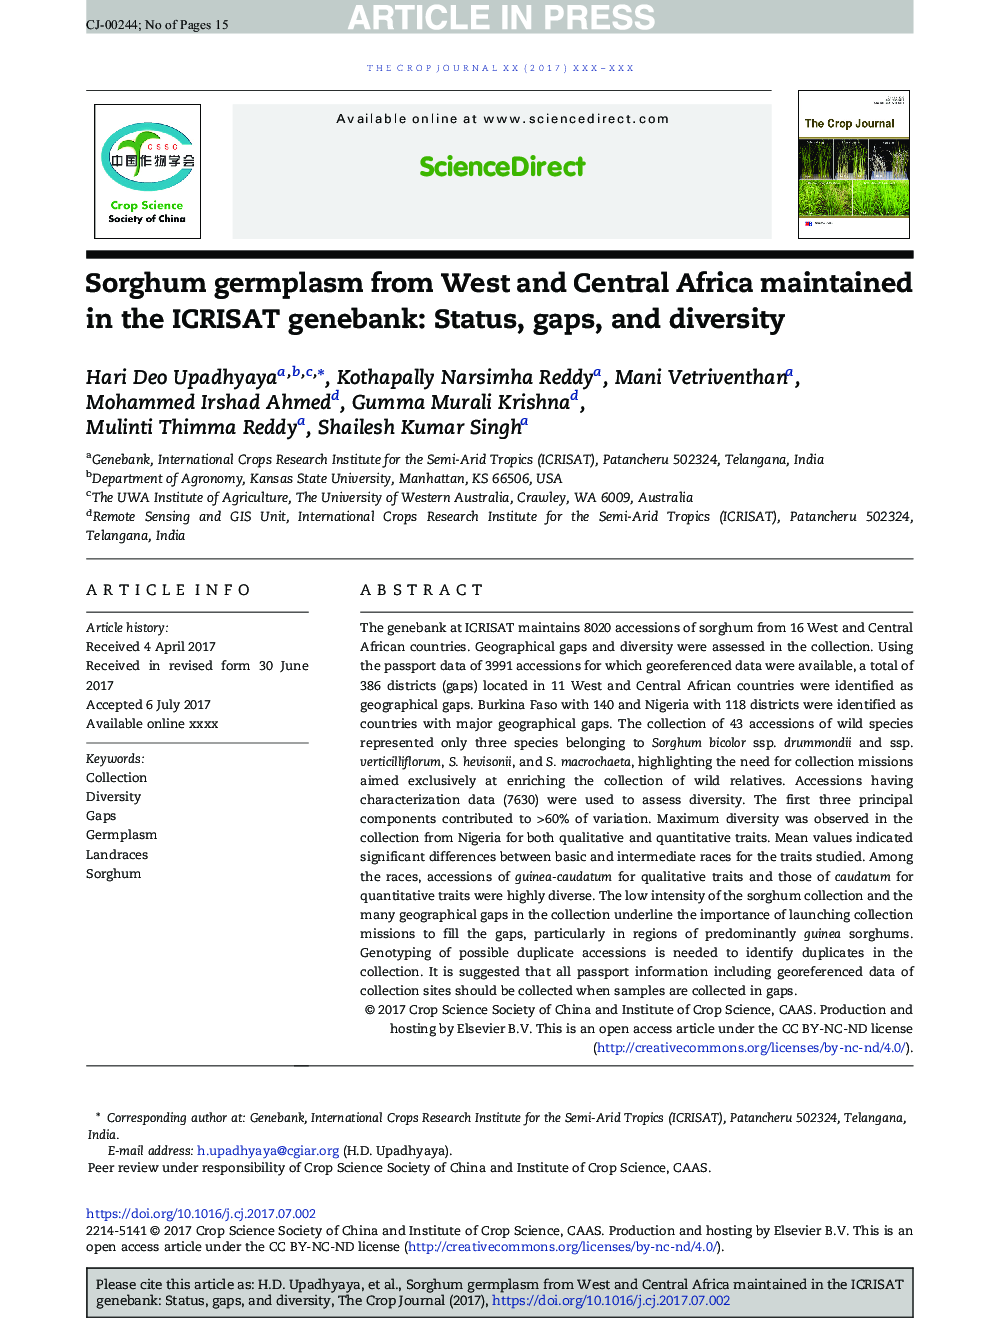 Sorghum germplasm from West and Central Africa maintained in the ICRISAT genebank: Status, gaps, and diversity